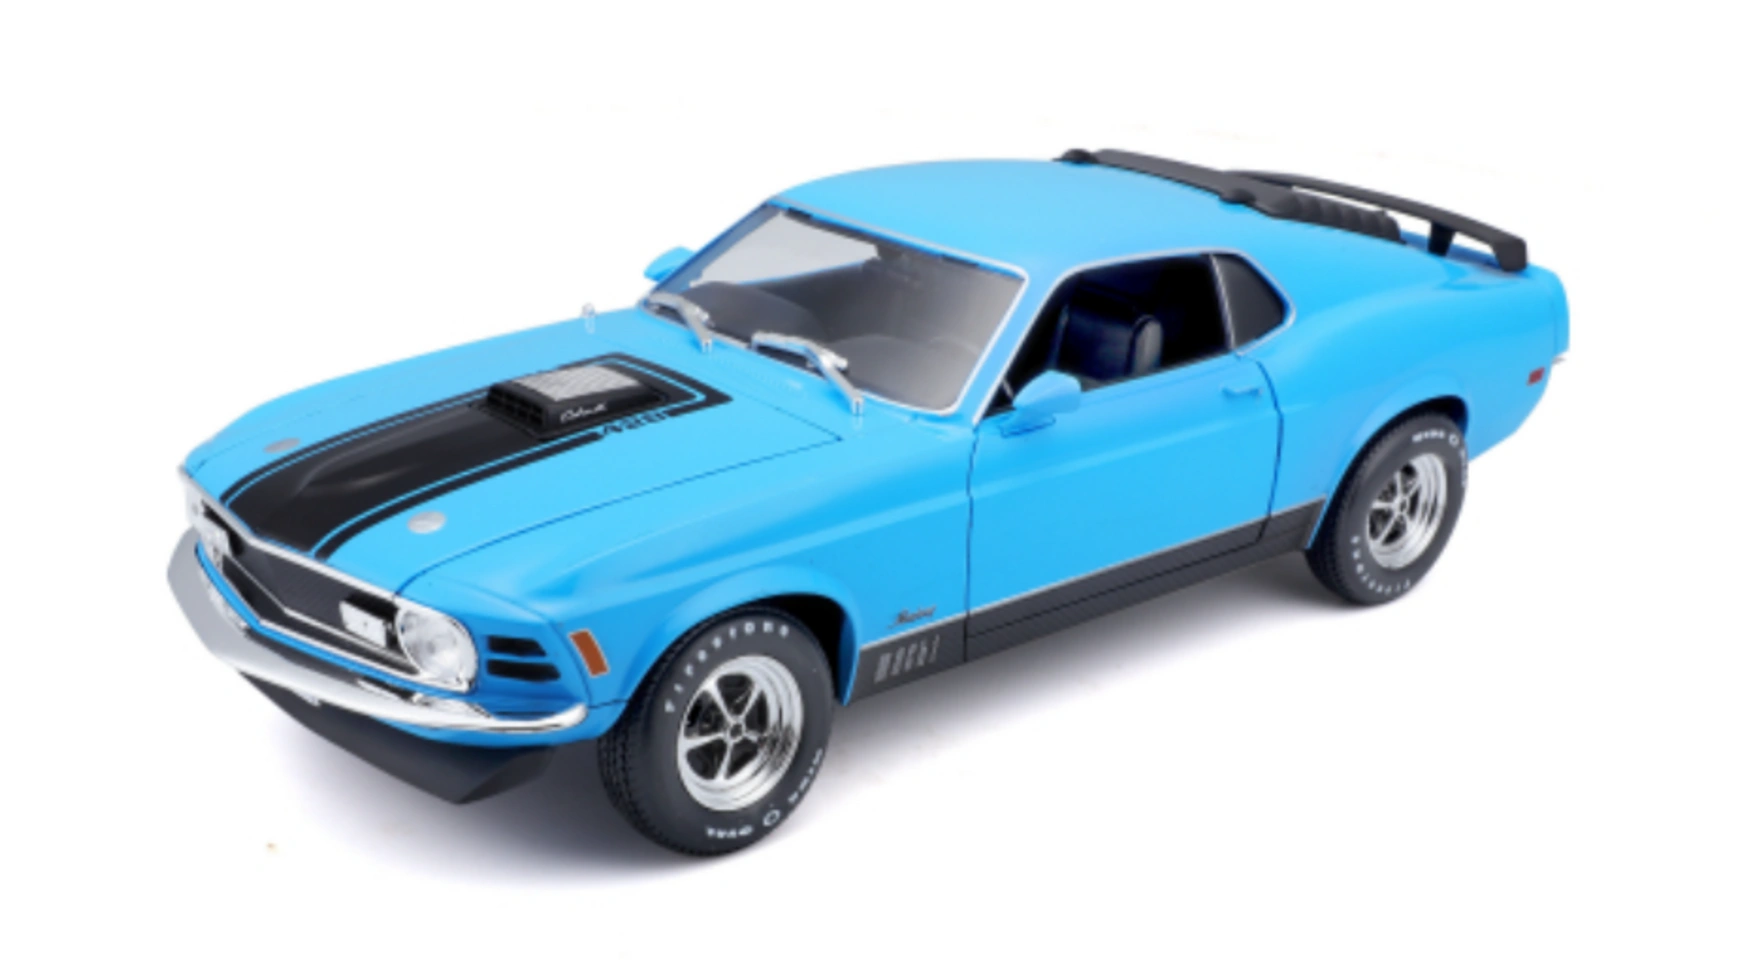 Maisto 1:18 Ford Mustang Mach 1 (1970) maisto 1 24 modified 1970 ford mustang boss 302 simulation alloy car model collection gift toy